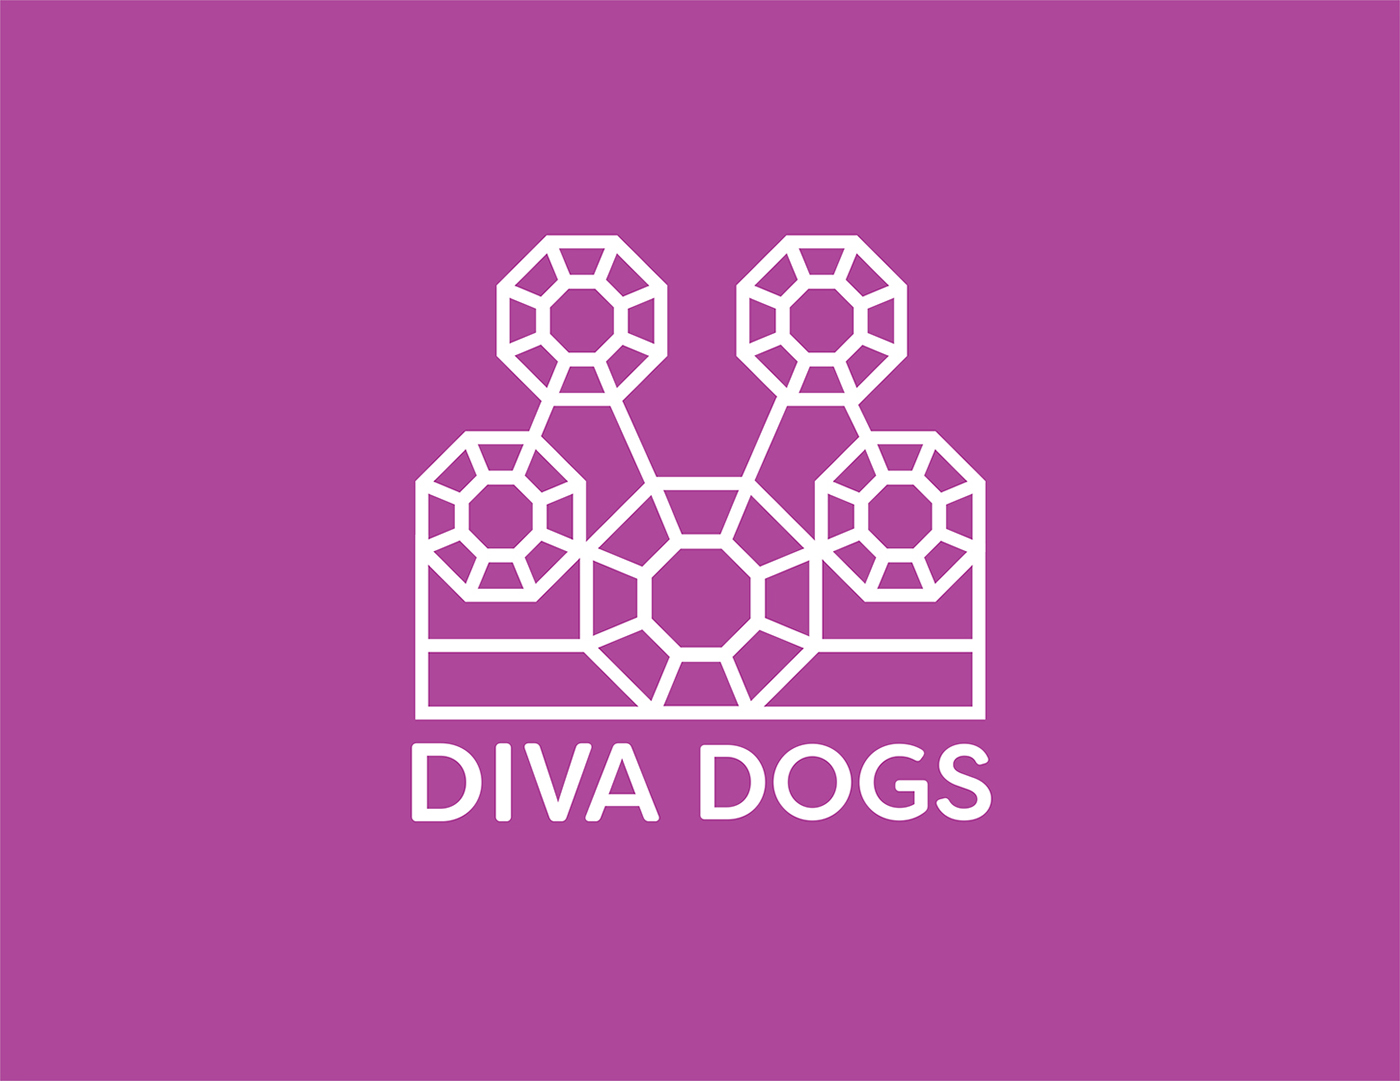 dogs Mobile app Diva Dogs feminine canine t-shirts Stationery